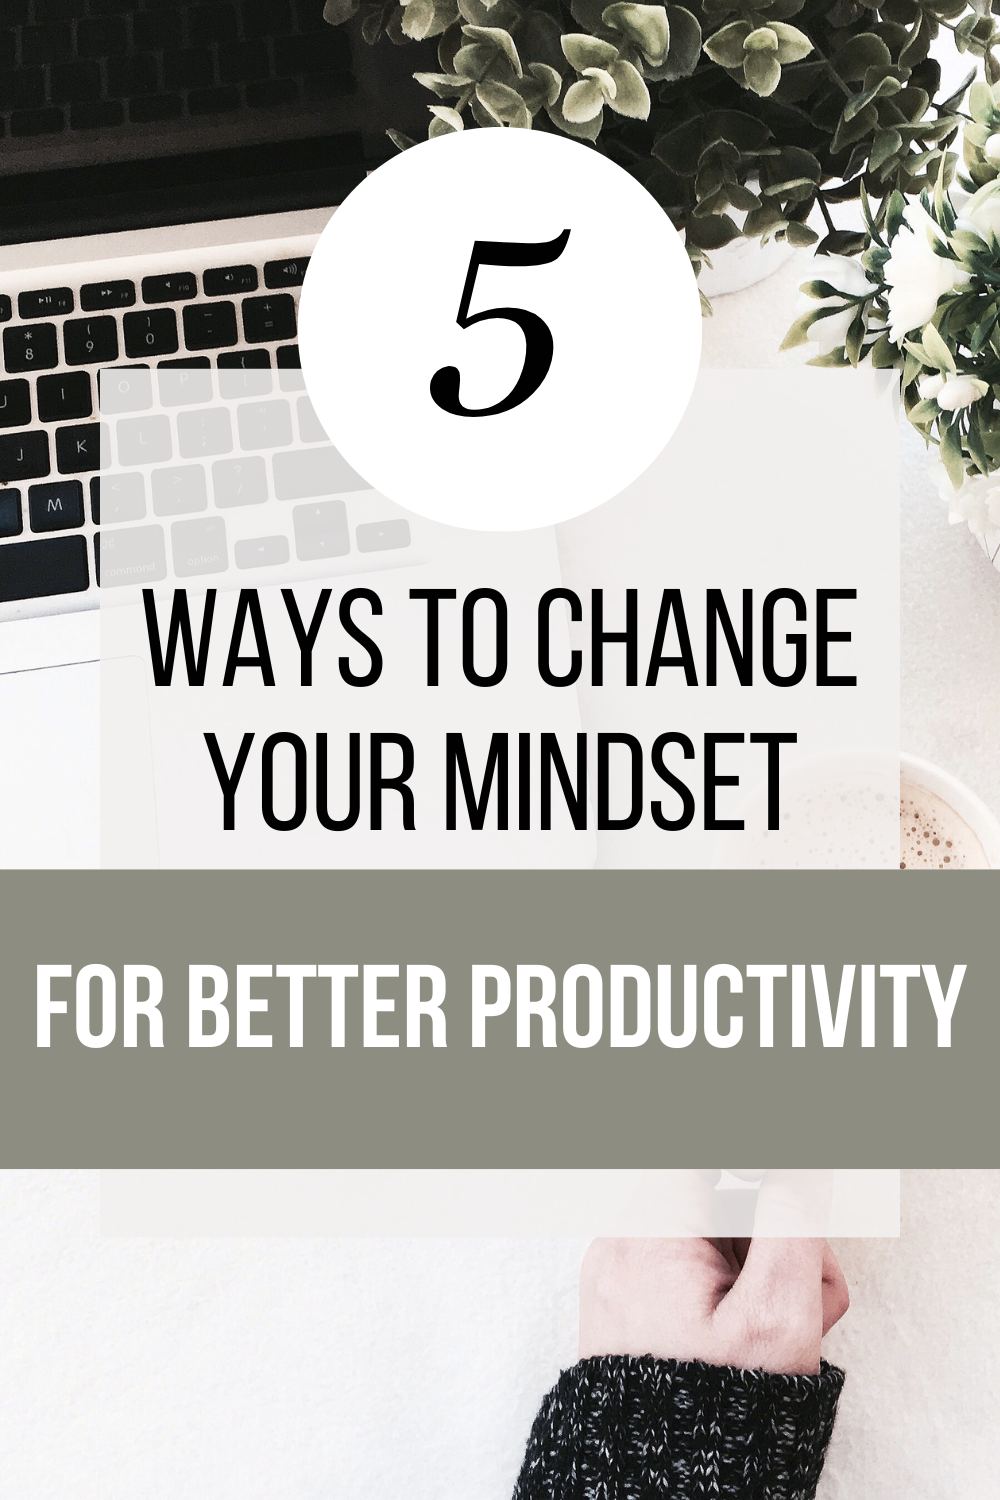 The Psychology of Organization: 5 Ways to Change Your Mindset for Better Productivity